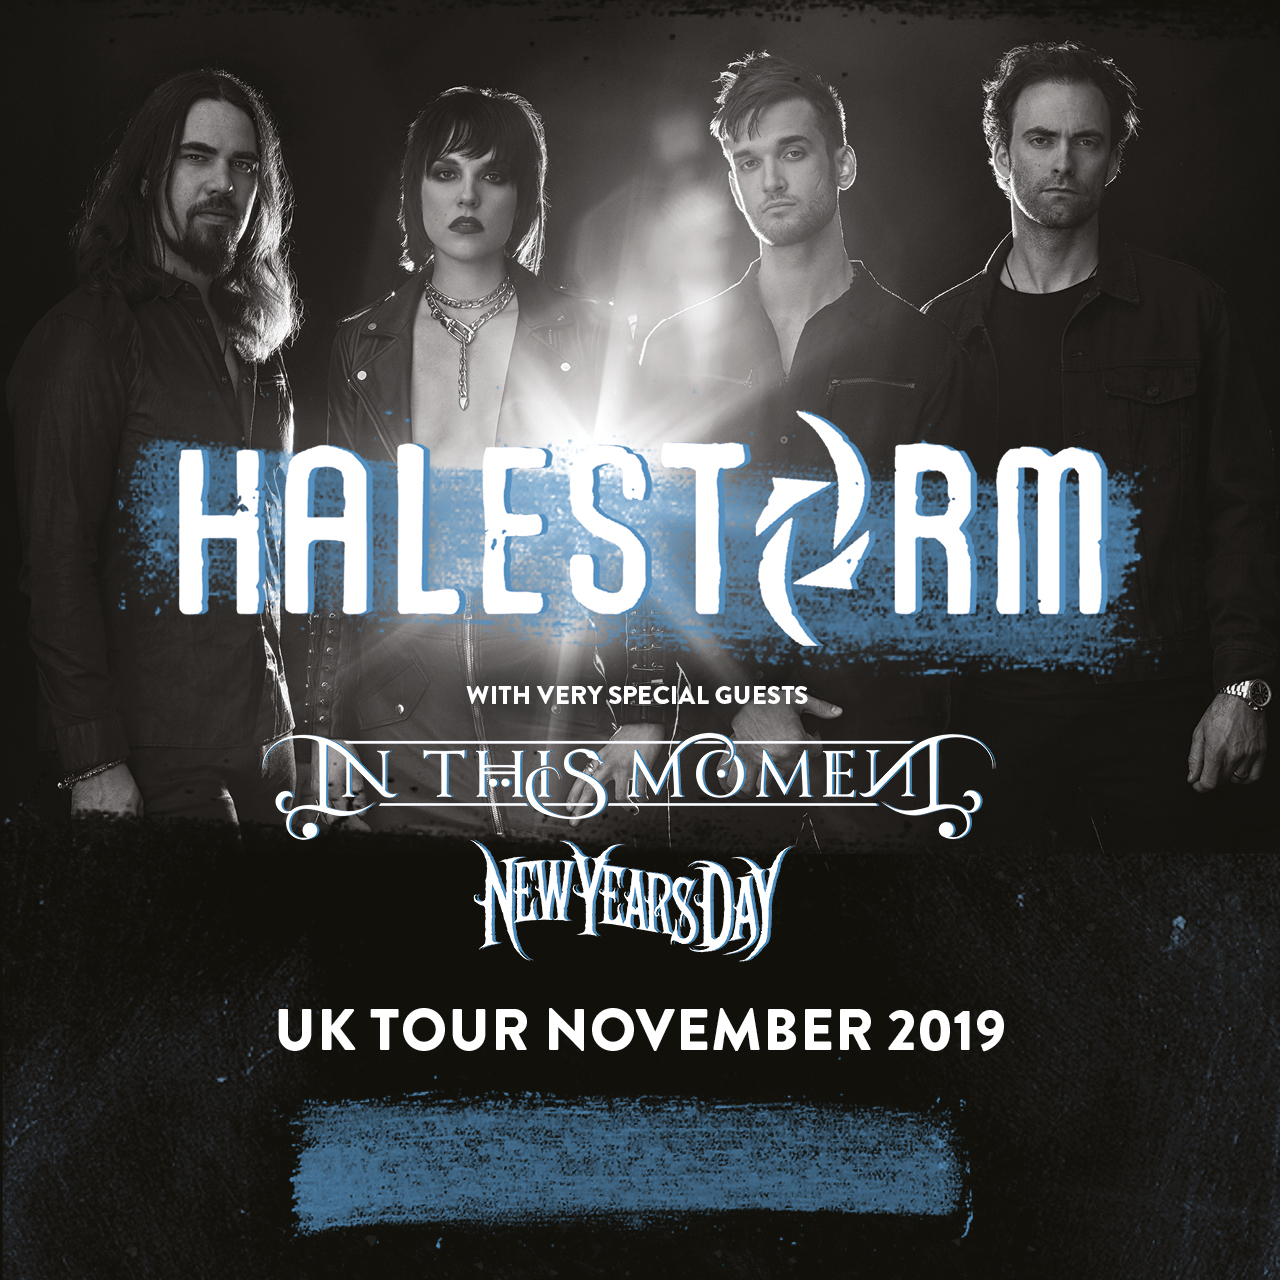 Music GRAMMYWINNING GROUP HALESTORM ANNOUNCE NEW UK ARENA TOUR